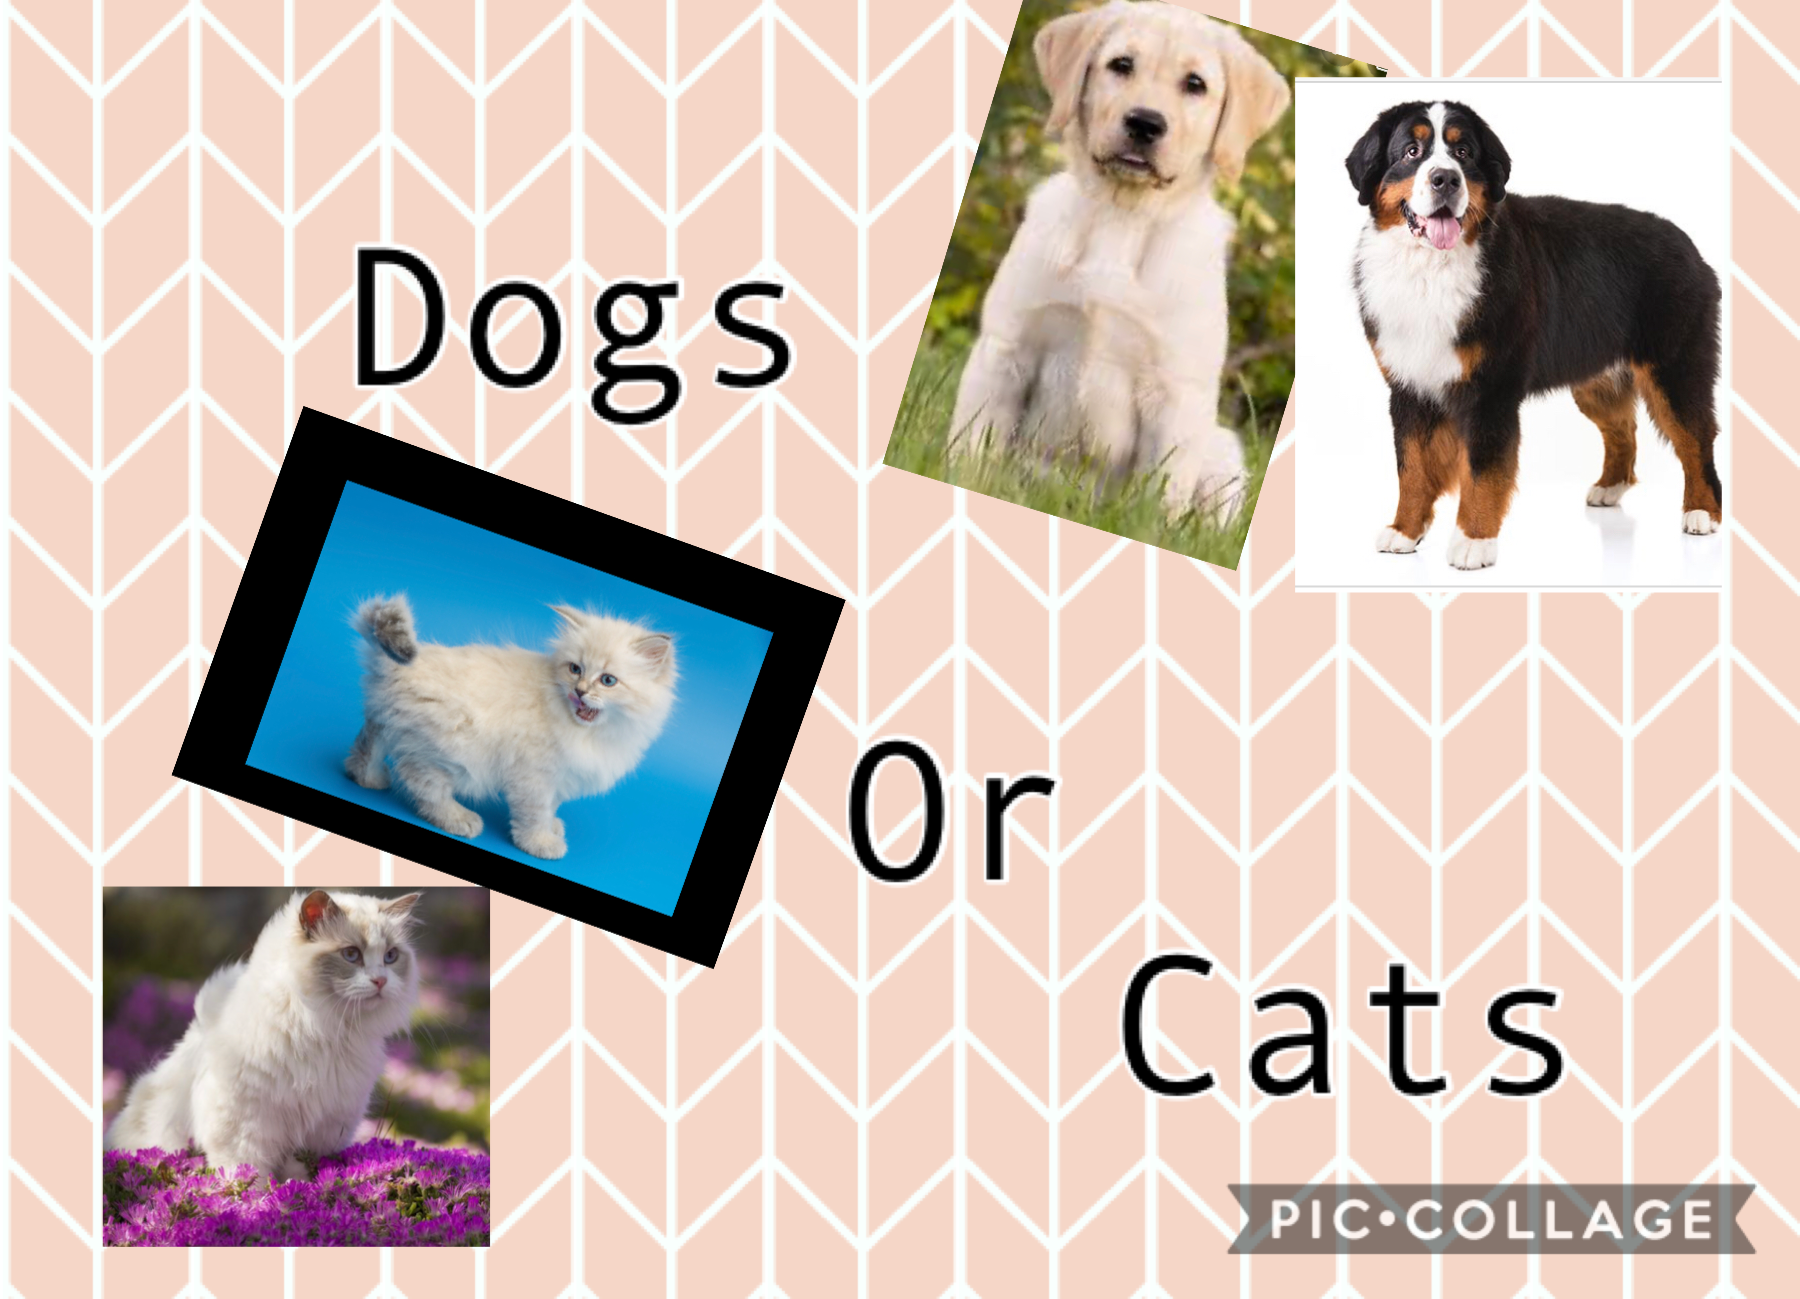 Comment which on you like more dogs or cats??? 🐱or🐶